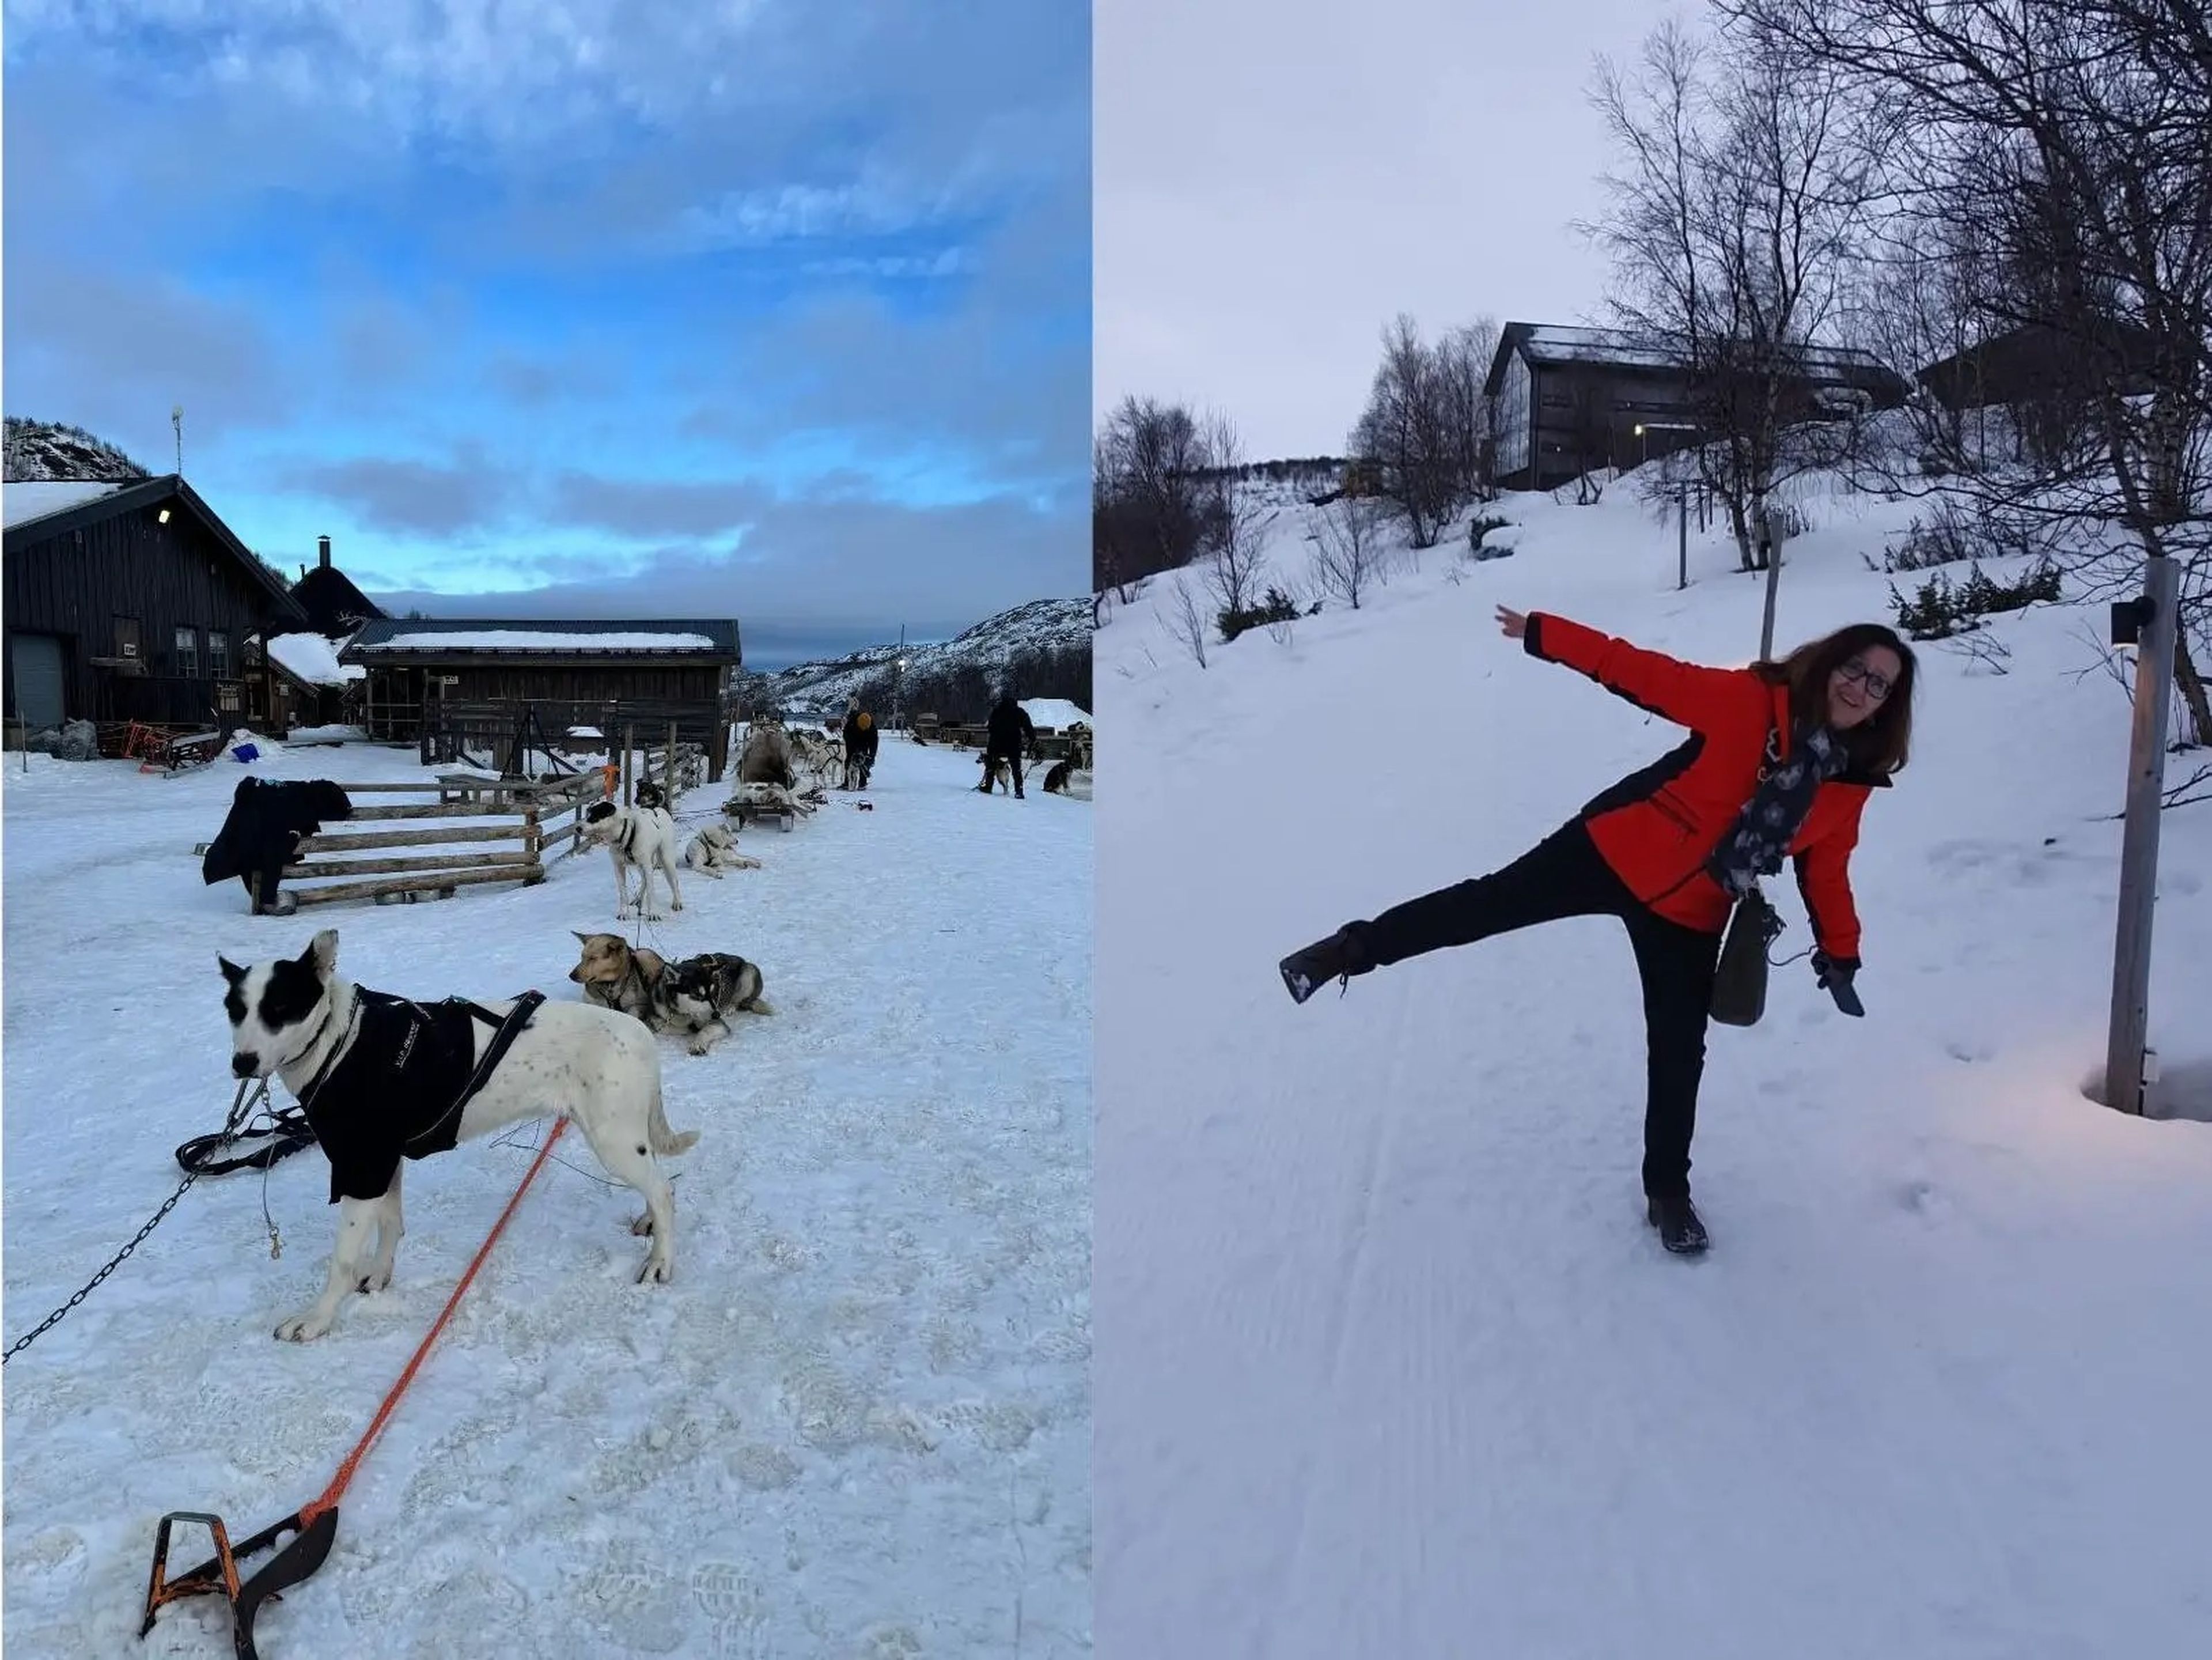 Huskies in Norway near the snow hotel and writer outside hotel